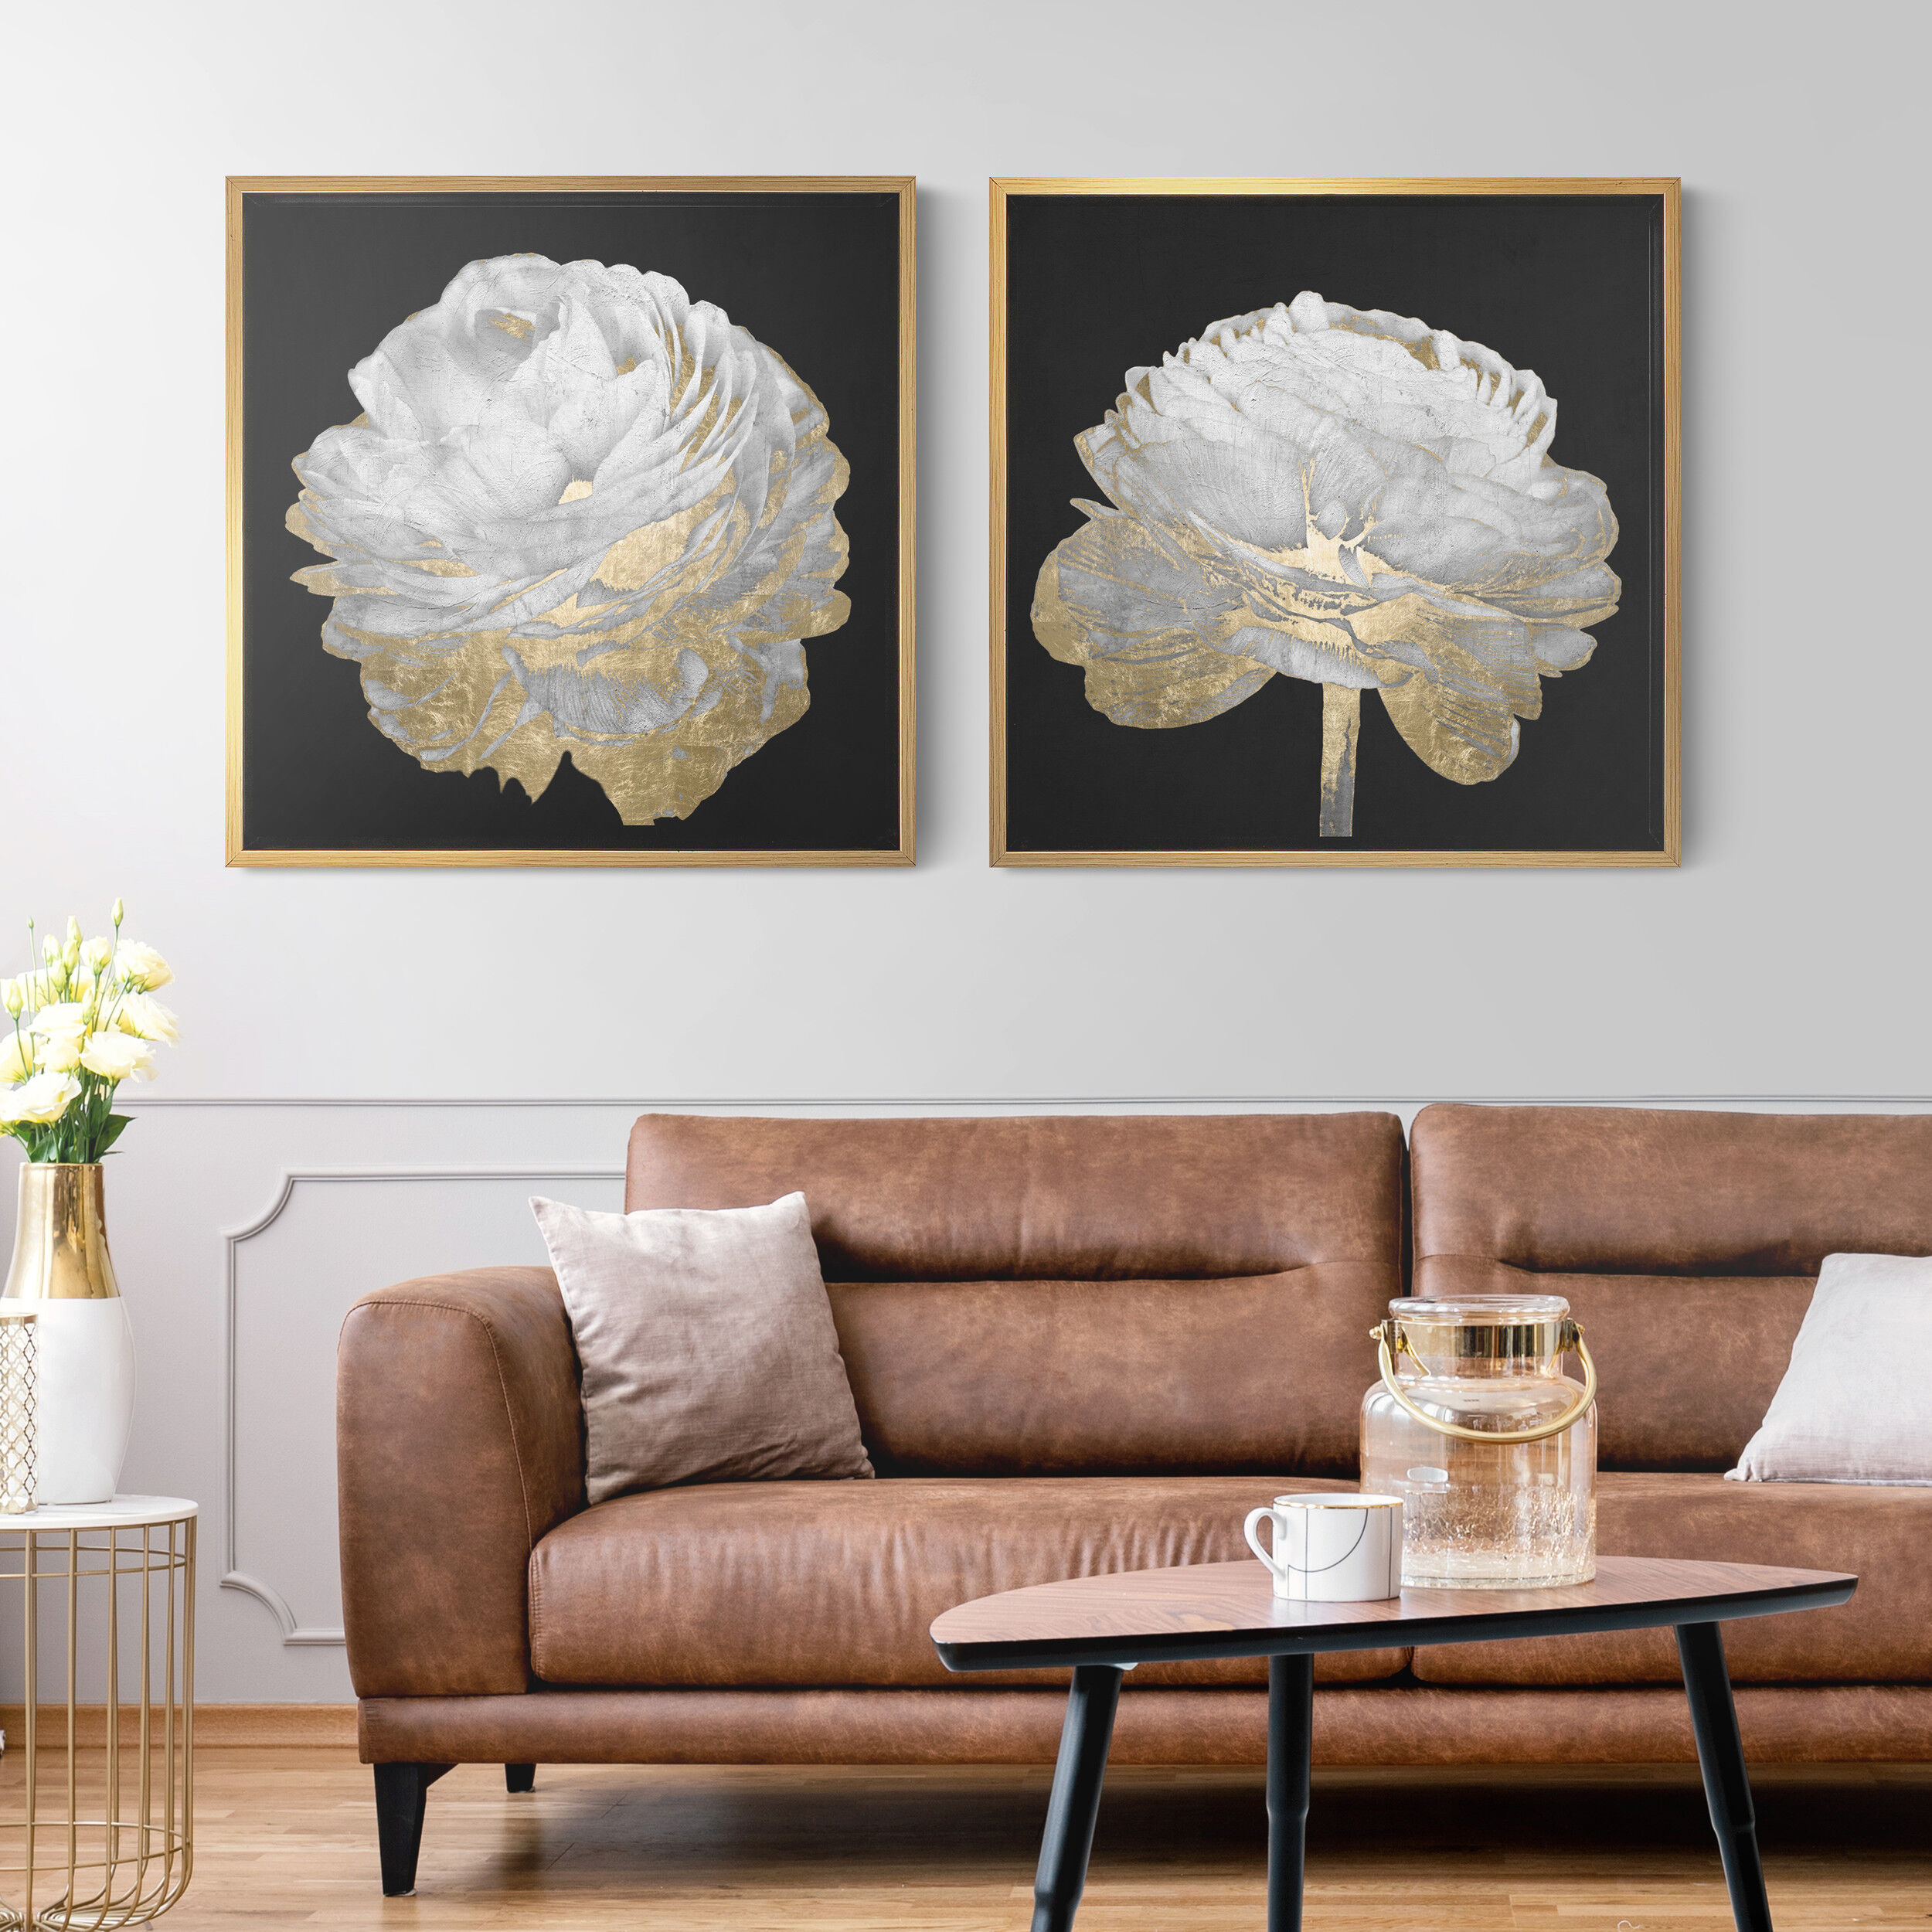 Premium Wall Art for Living Room | Oliver Gal